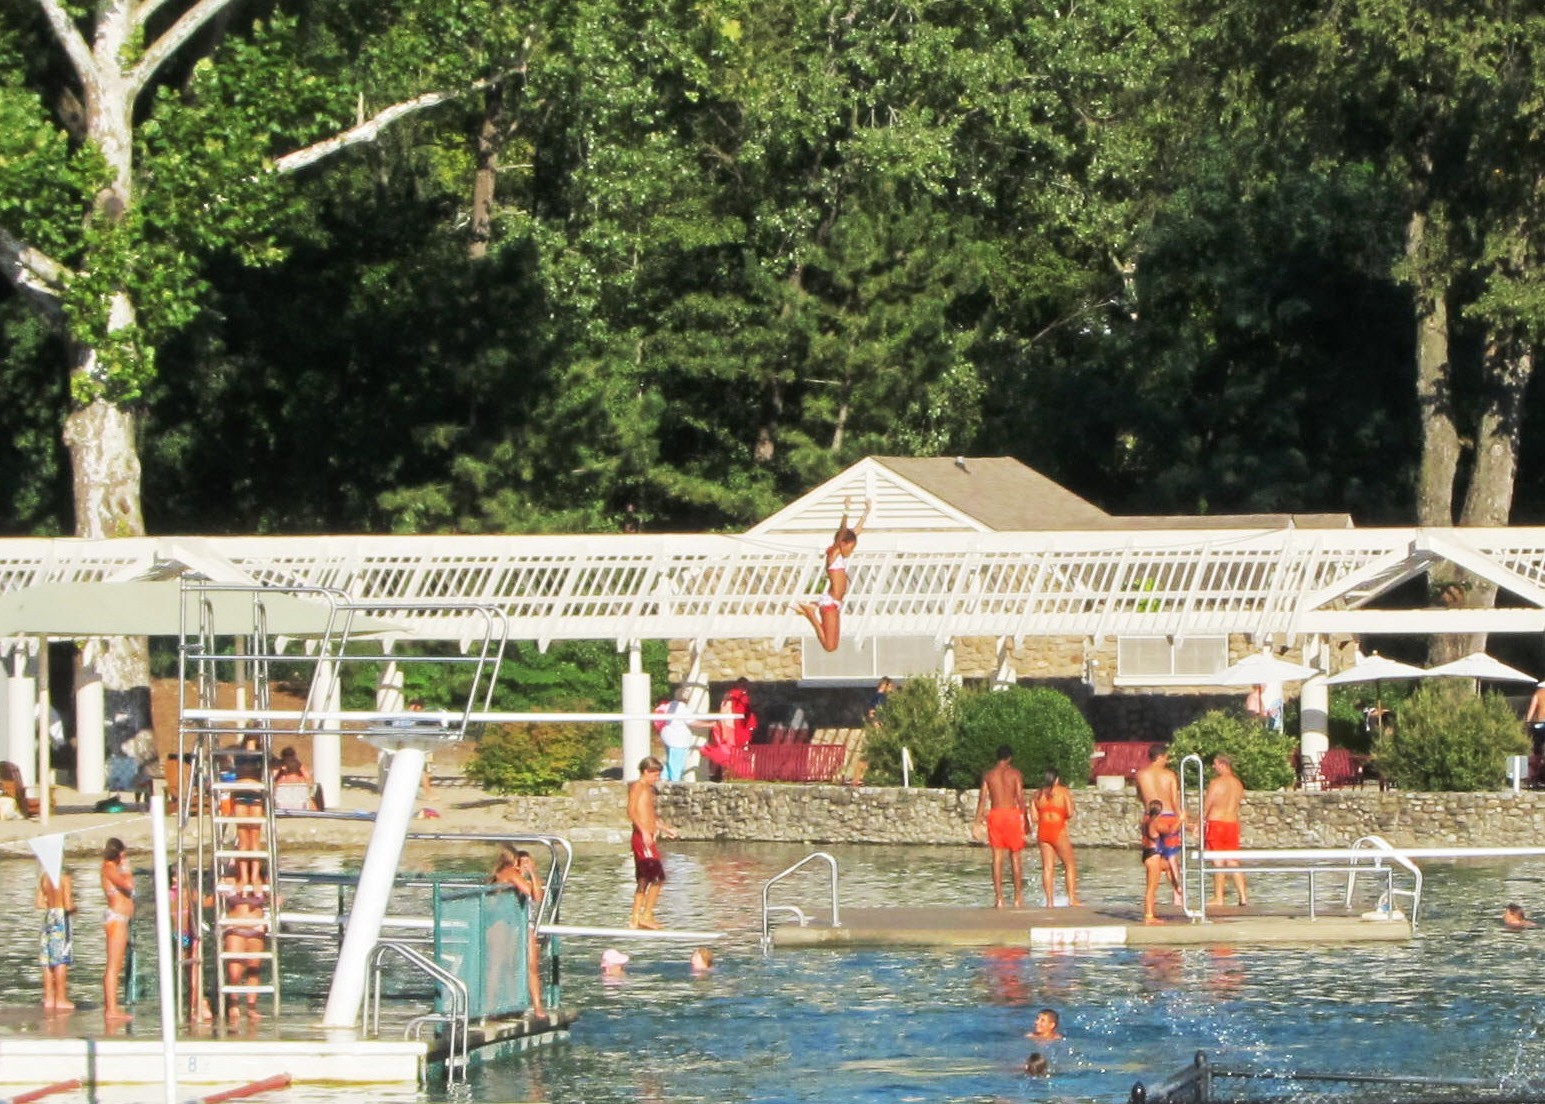 graydon pool kids on high dive low dive and 12 ft raft cropped